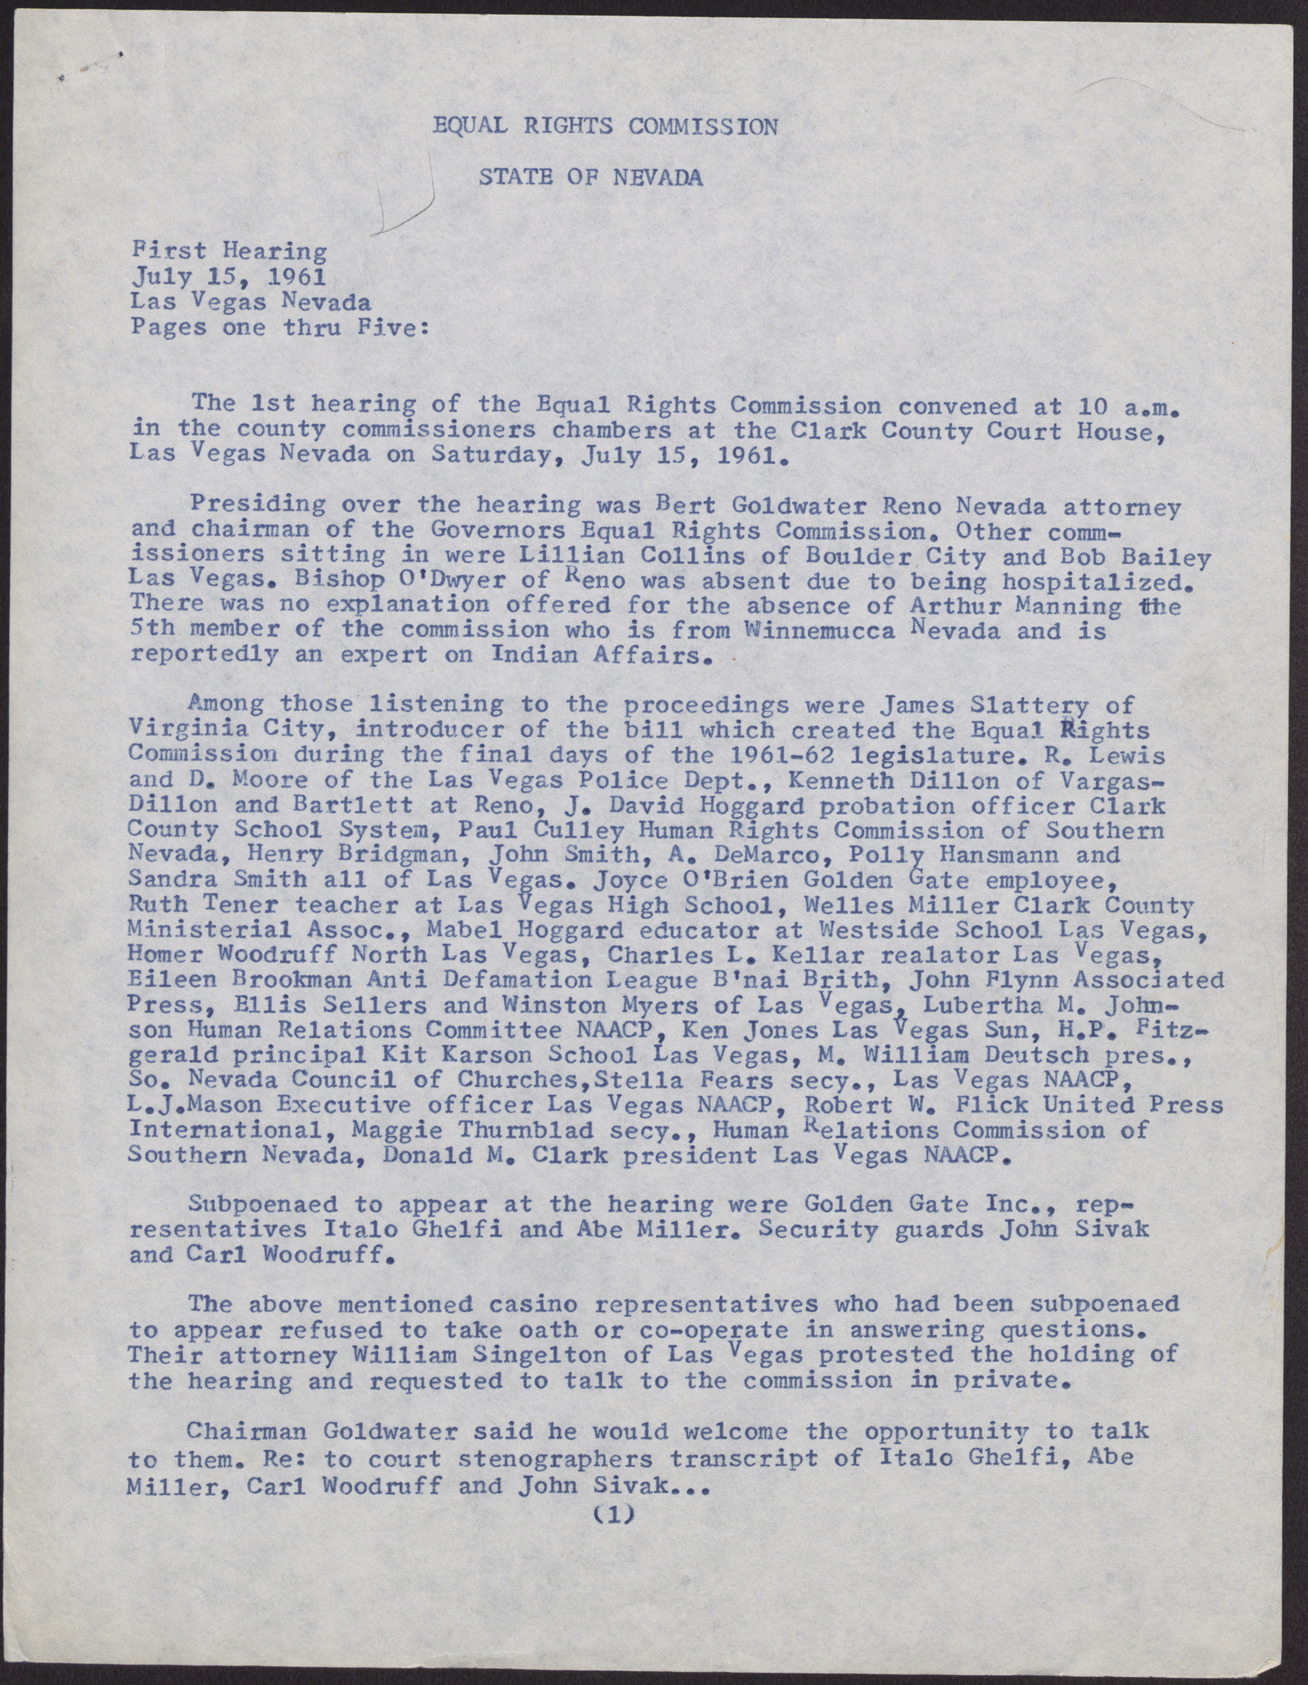 Minutes for the State of Nevada Equal Rights Commission First Hearing (5 pages), July 15, 1961